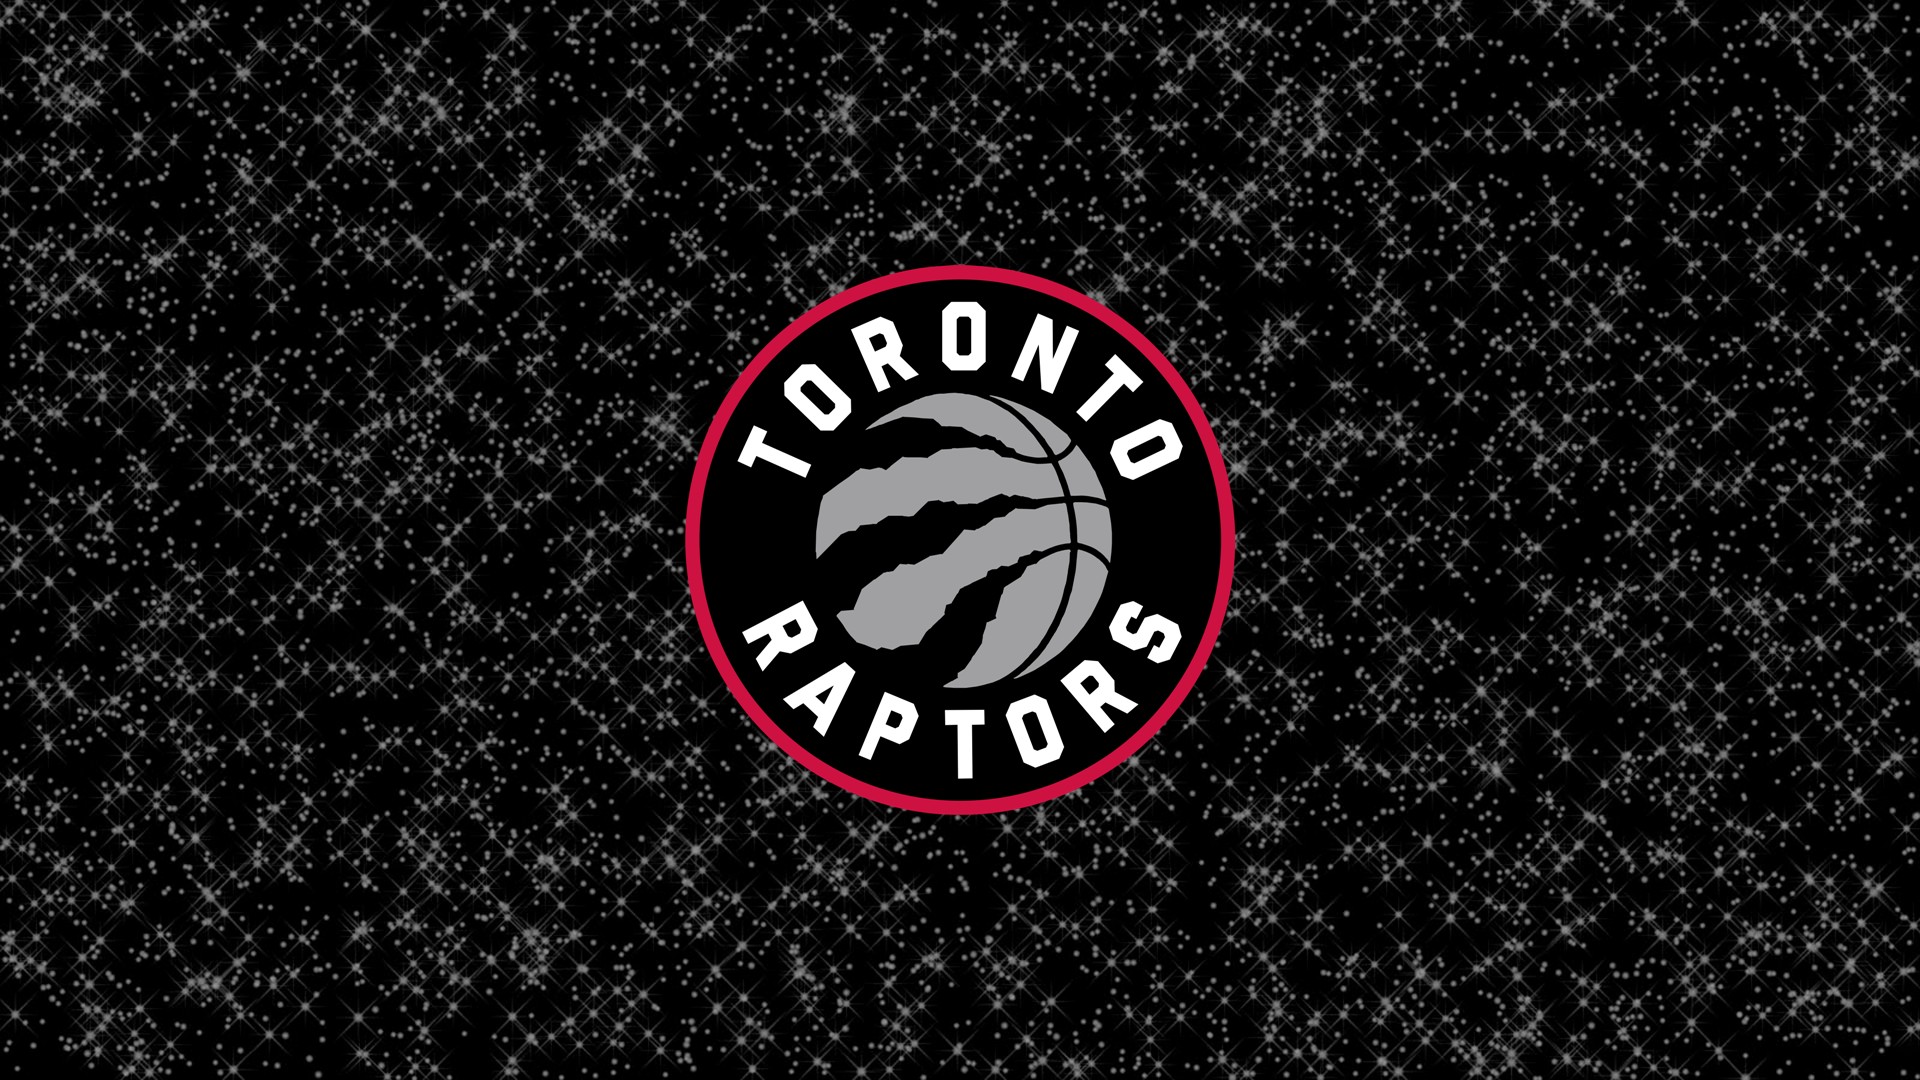 HD Backgrounds Basketball Toronto with image dimensions 1920x1080 pixel. You can make this wallpaper for your Desktop Computer Backgrounds, Windows or Mac Screensavers, iPhone Lock screen, Tablet or Android and another Mobile Phone device